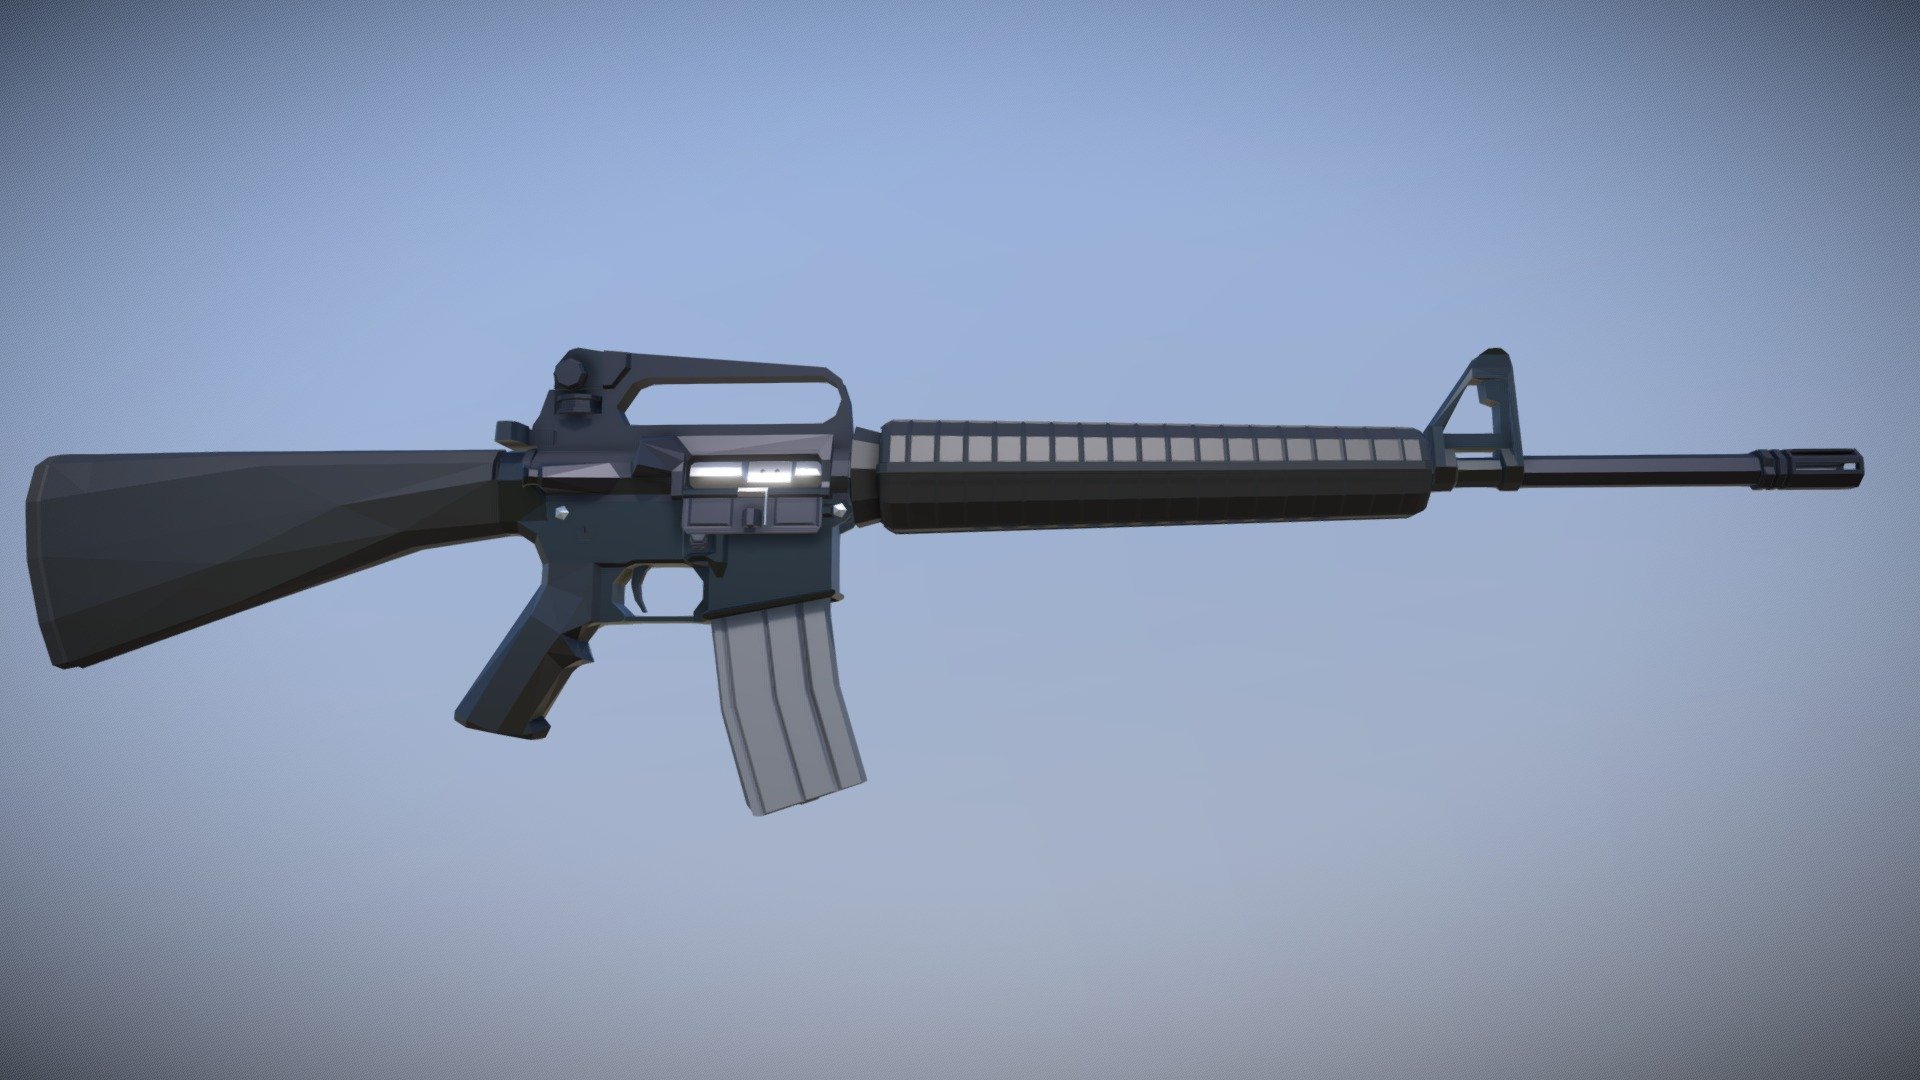 The M16A2, a rifle well known for the wars and conflicts it was seen in. It was adopted by the US Military in the 1980s, featuring an improved handguard, stronger stock, and brass deflector. Just like other M16 rifles before and after it, this weapon is easily distinguishable by its unique carryhandle, front sight and magazine.

Changelog:
31/08/2022
improved rear sight to more accurately represent the real thing, added additional details in stock, simplified geometry to keep tri count about the same, changed geometry to triangles to make exporting easier 3d model